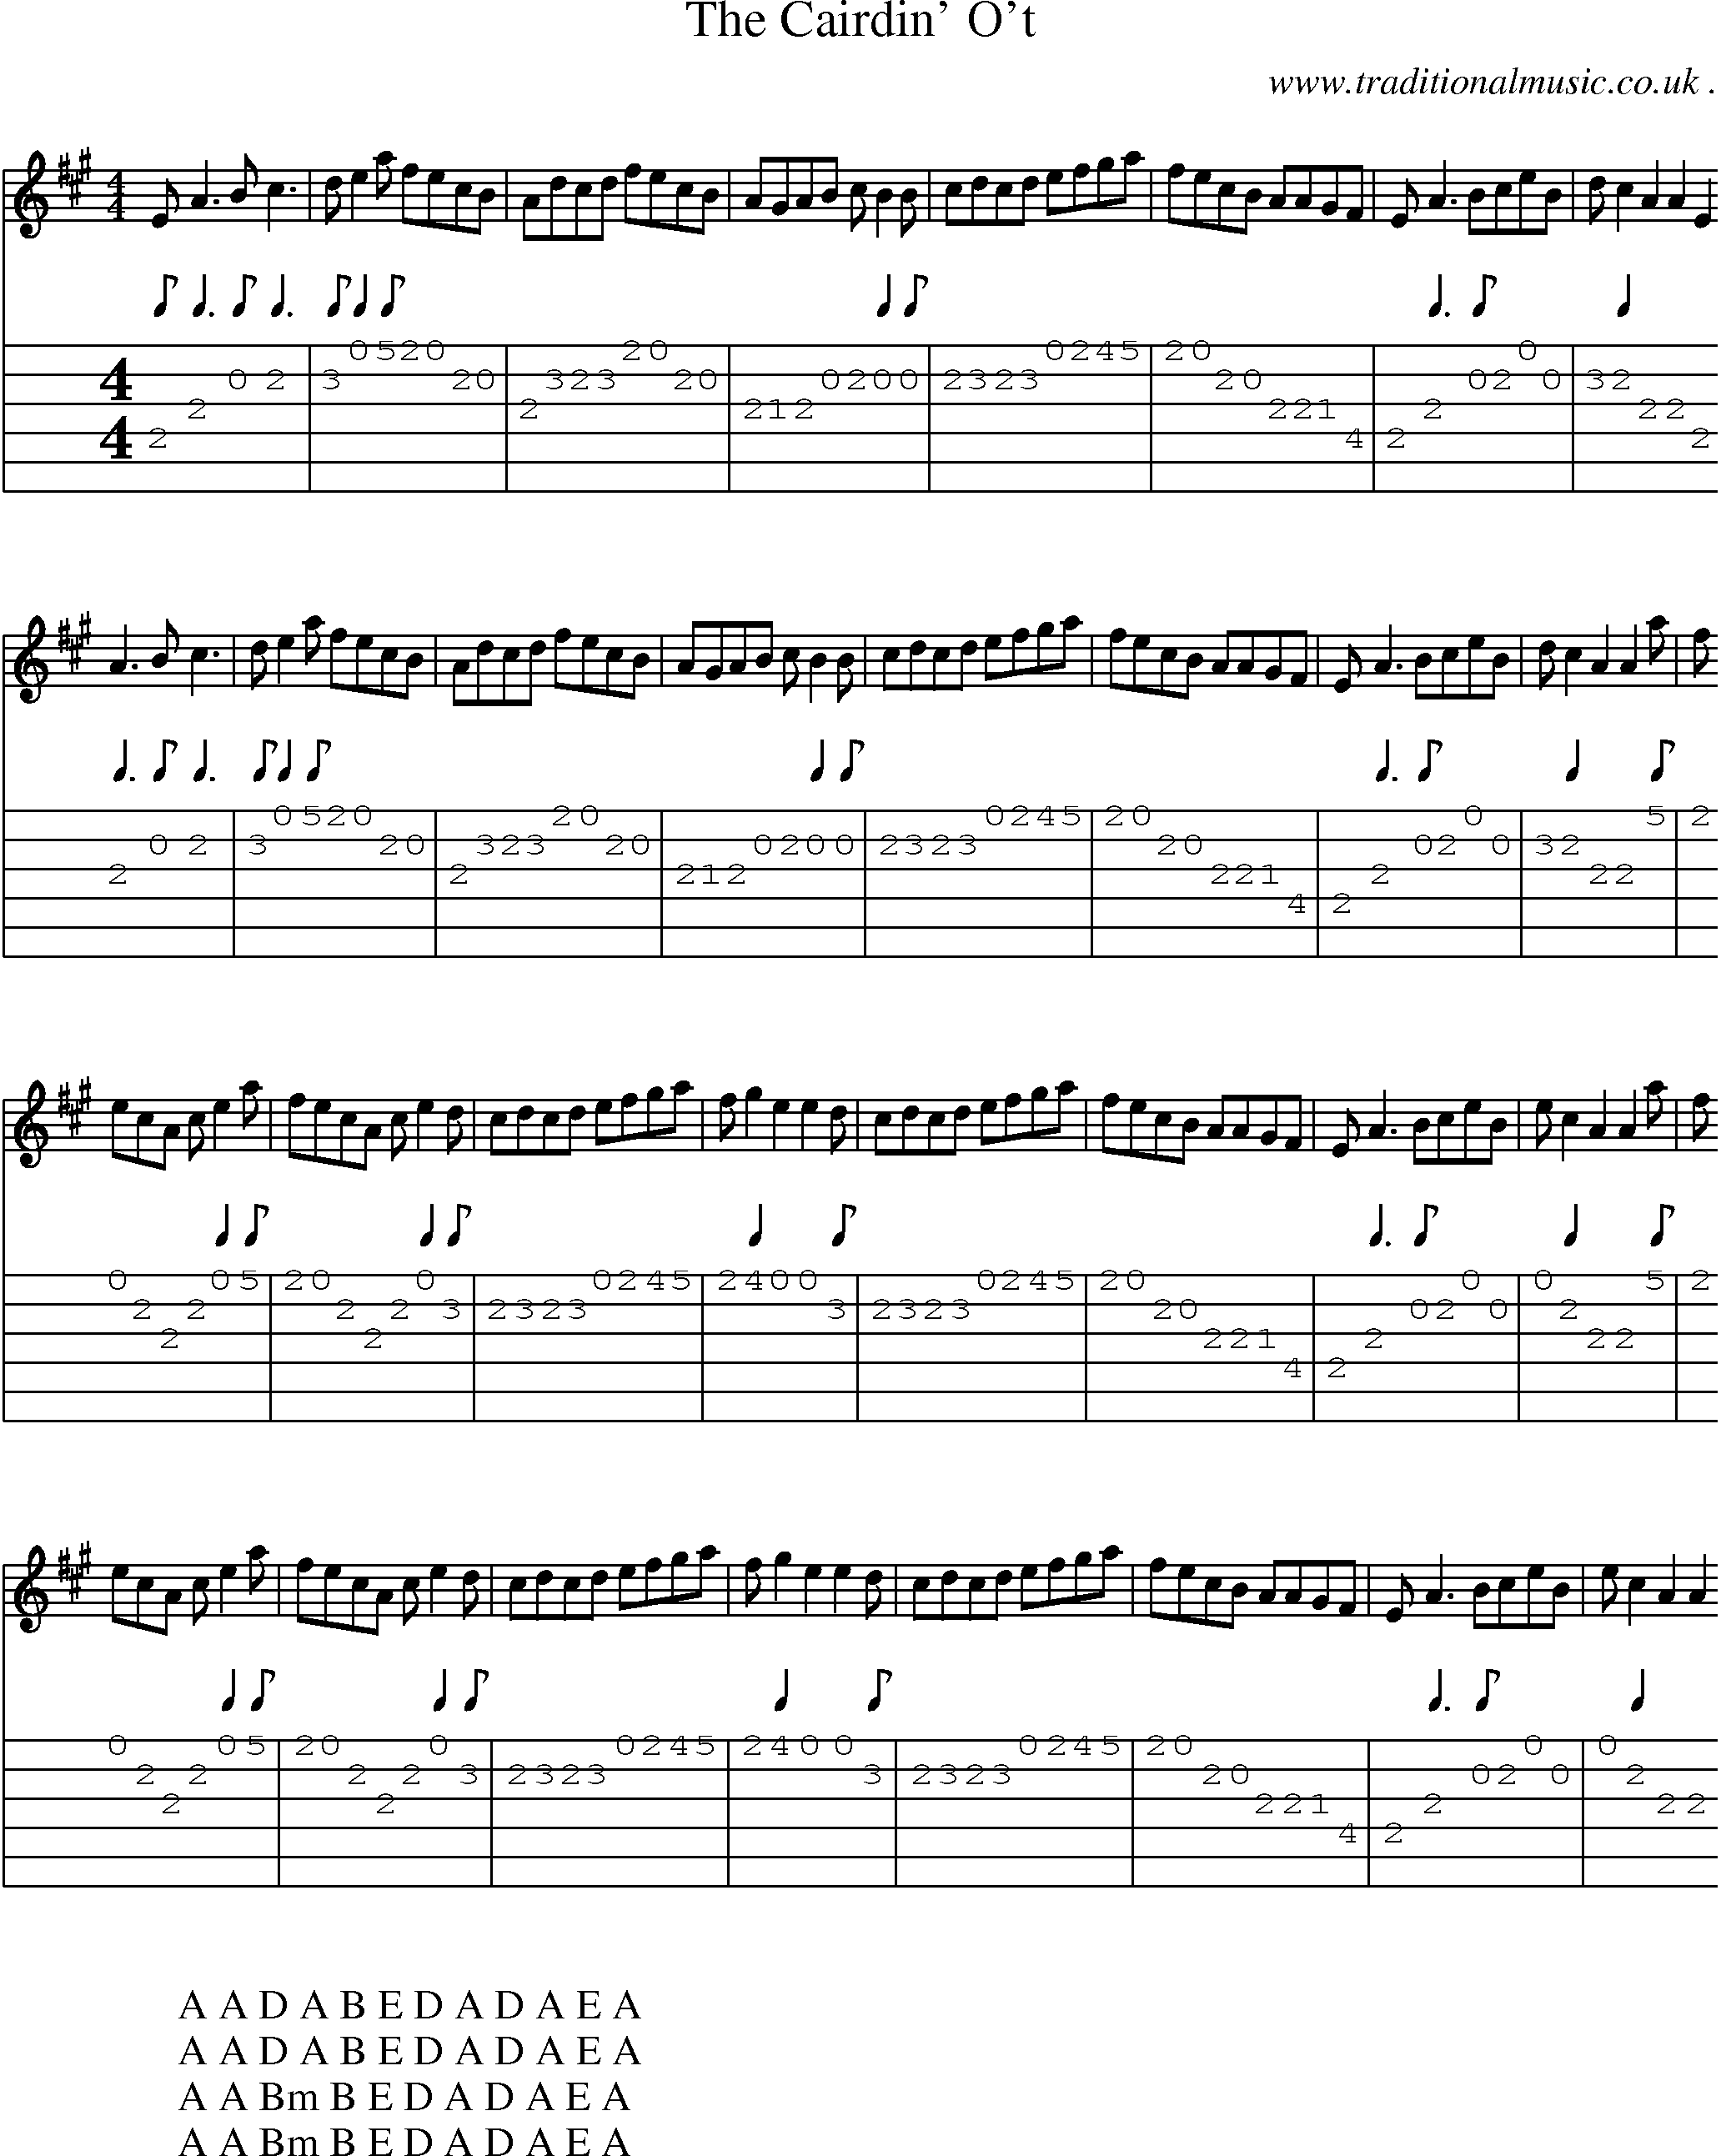 Sheet-music  score, Chords and Guitar Tabs for The Cairdin Ot